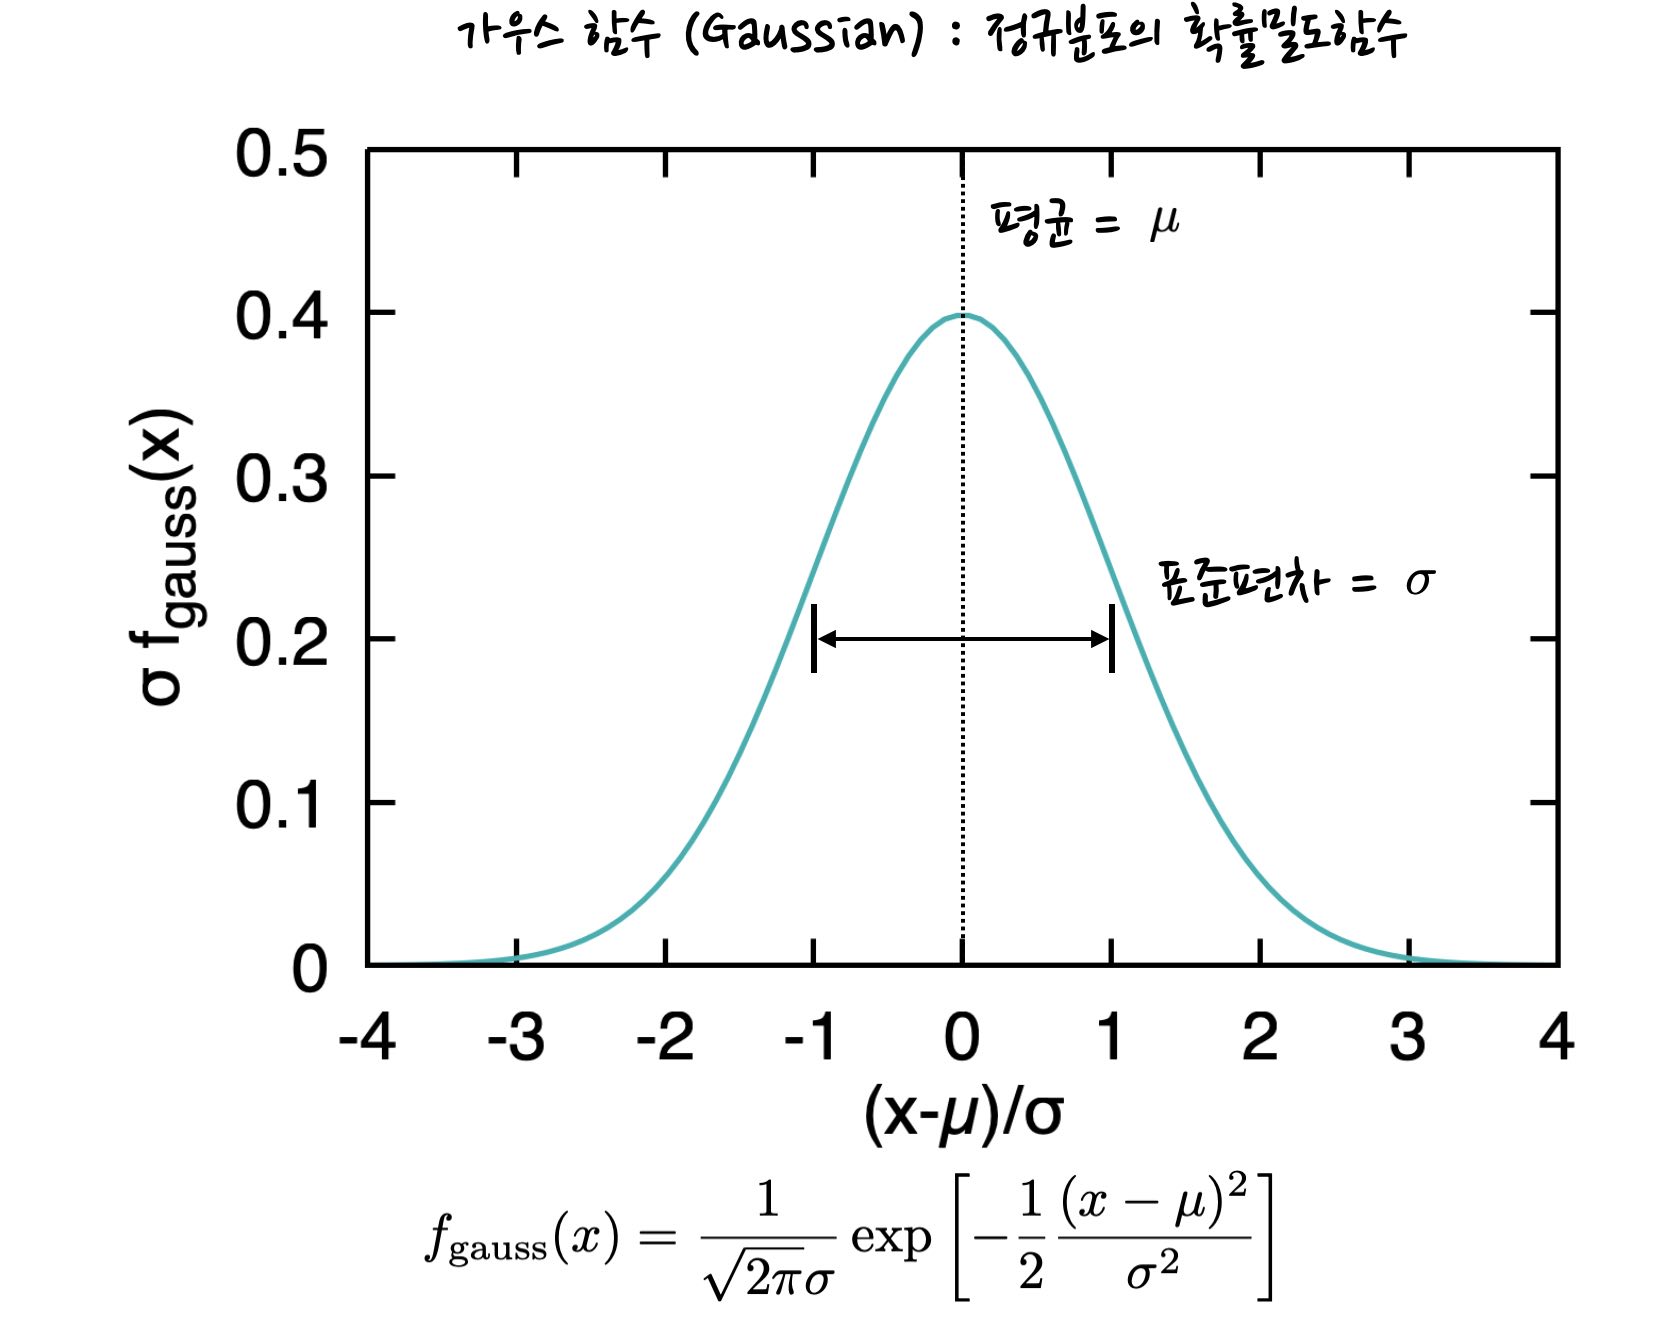 schematics of Gaussian distribution function, showing formula and plot. Mean and standard deviation are also indicated in the plot.